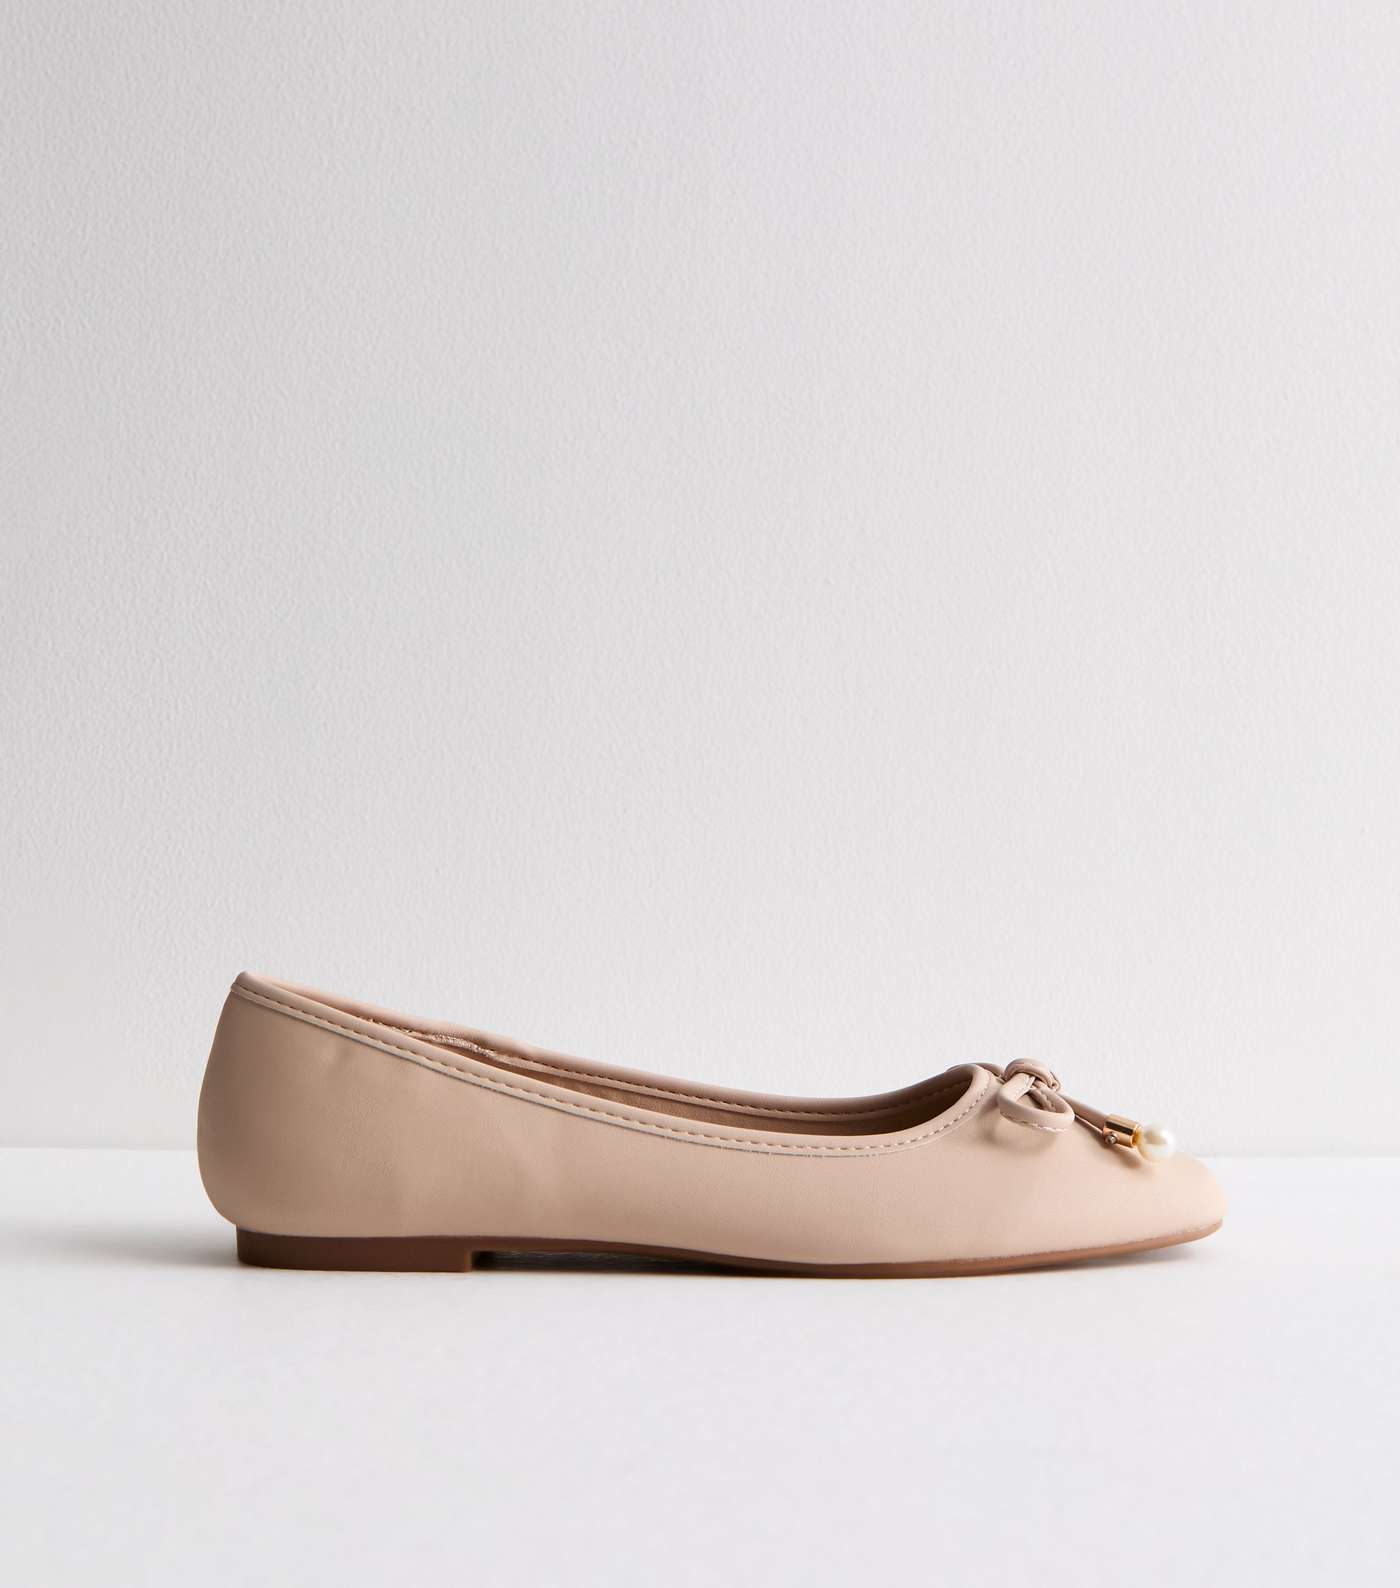 Truffle Pale Pink Faux Pearl Ballerina Pumps Image 5